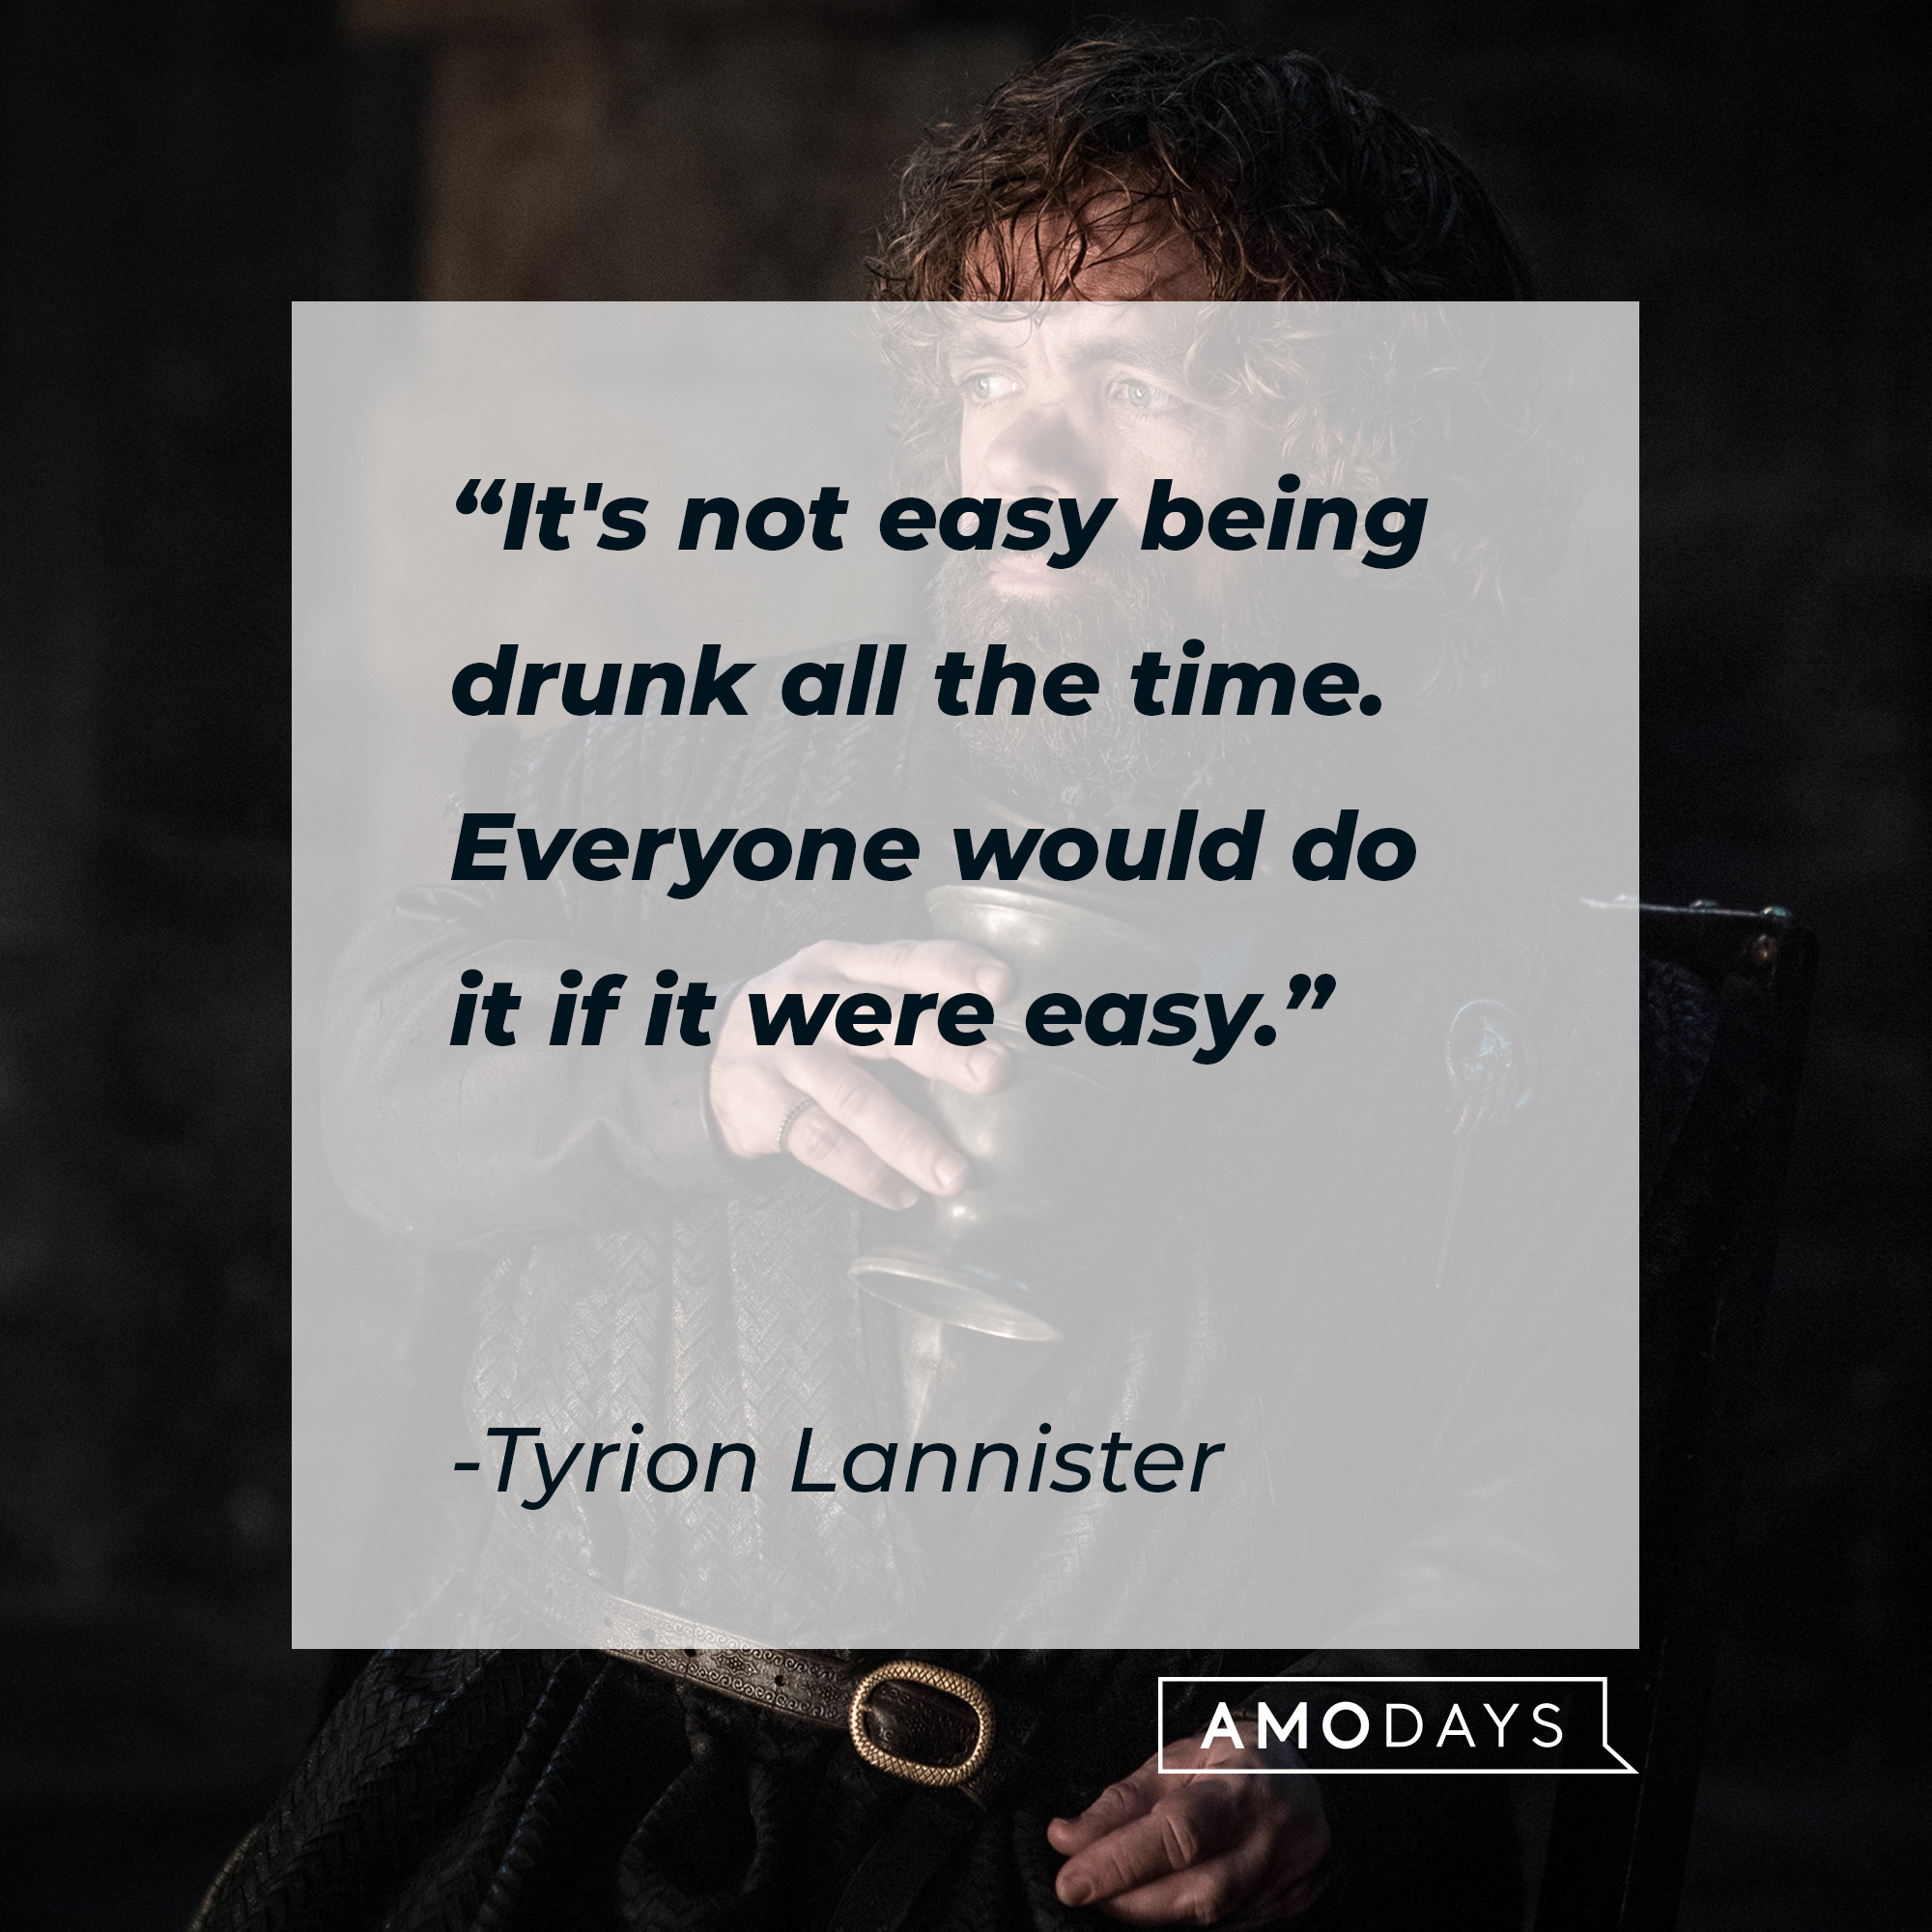 Tyrion Lannister's quote: “It's not easy being drunk all the time. Everyone would do it if it were easy.” | Source: facebook.com/GameOfThrones